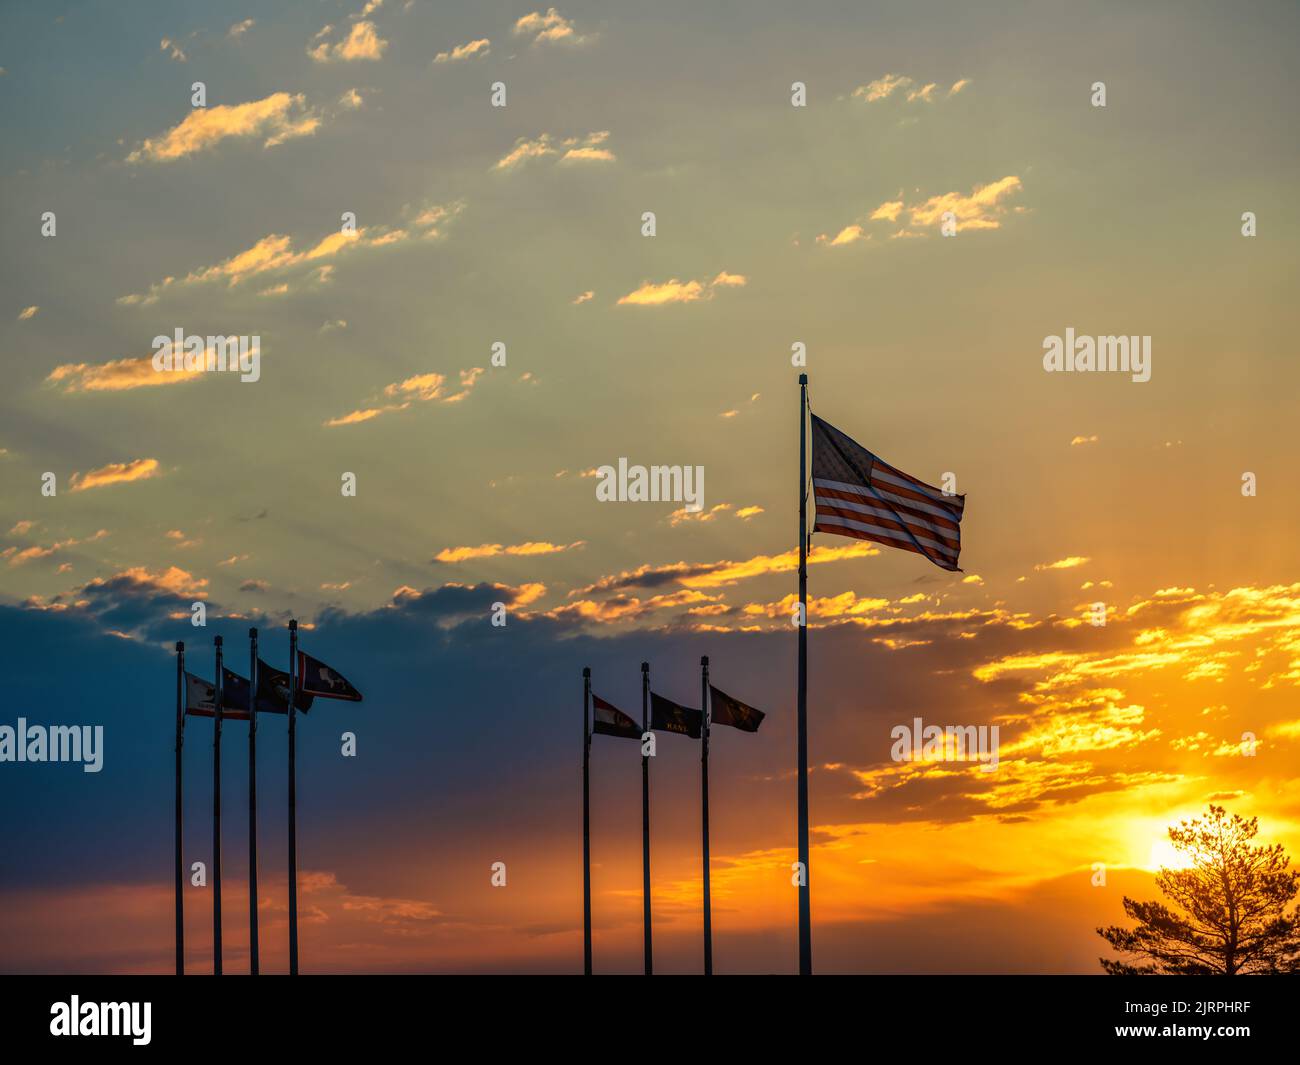 American Flag and several State Flags in silhouette against a cloudy sunrise sky. Stock Photo